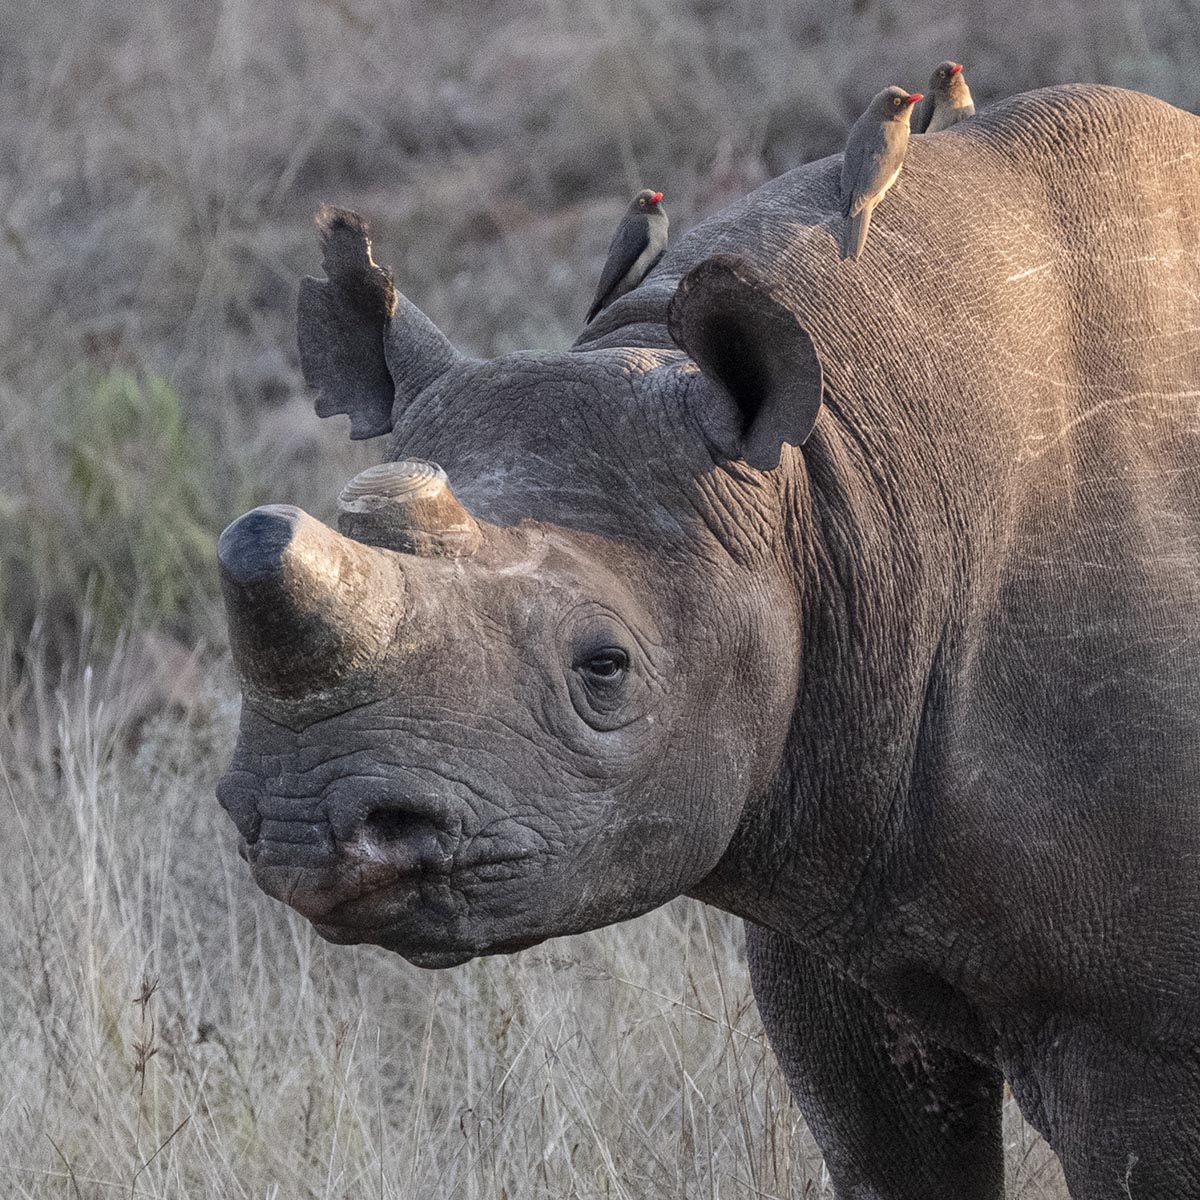 Rhinos’ horns were cut to thwart poachers. After, they didn’t go out much.

#Animals #Extinction #Rhinos #RhinoHorns #Poaching #SocialNetworks #BlackRhinos 

nytimes.com/2023/06/12/cli… @nytimes